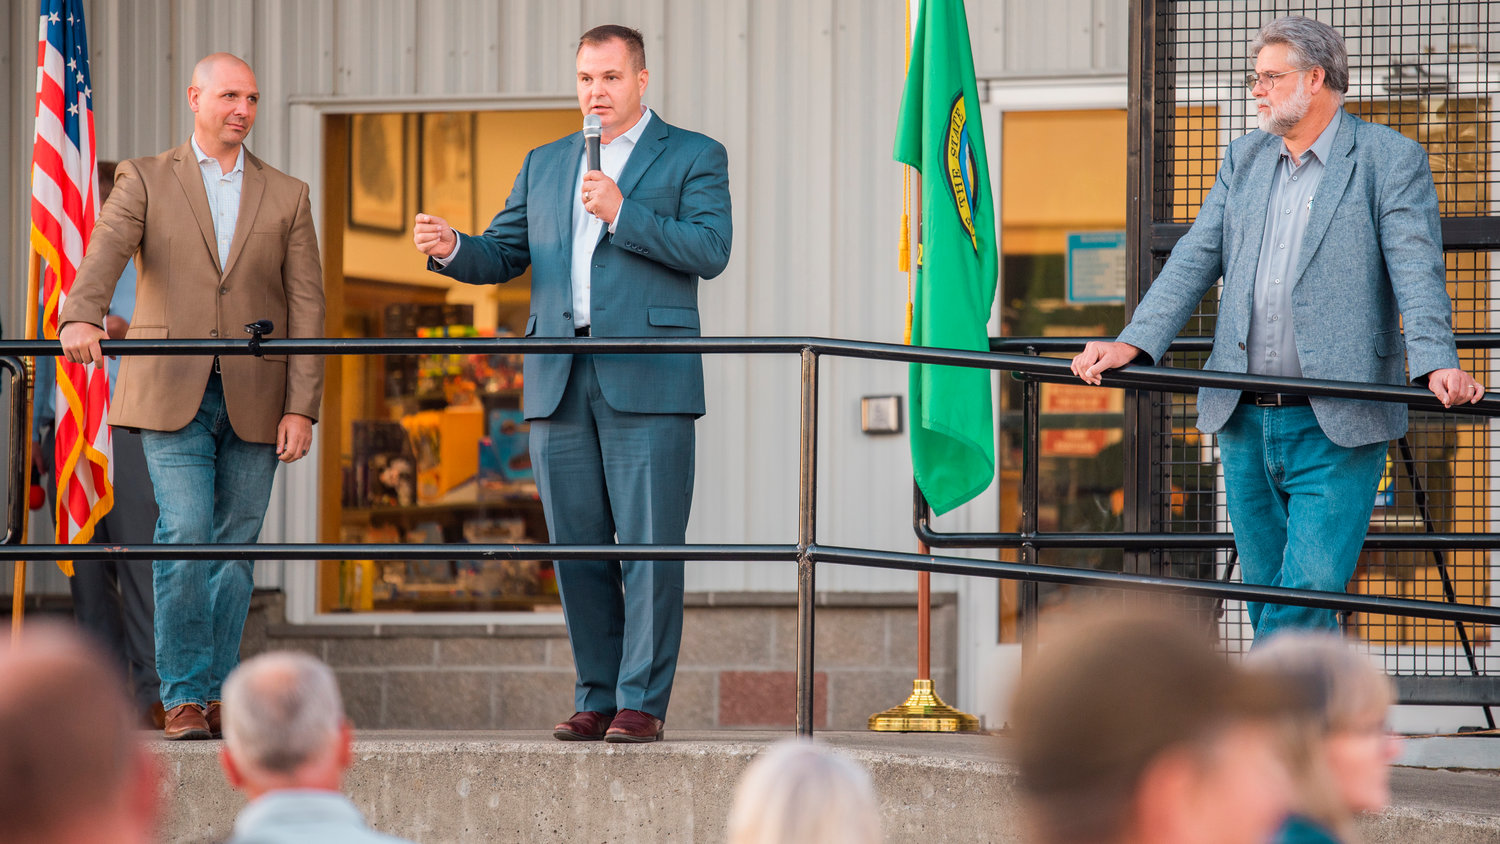 Washington state Sen. John Braun uses a microphone to speak to crowds during a town hall event at the Veterans Memorial Museum alongside sate Reps. Peter Abbarno and Ed Orcutt Monday evening in Chehalis.